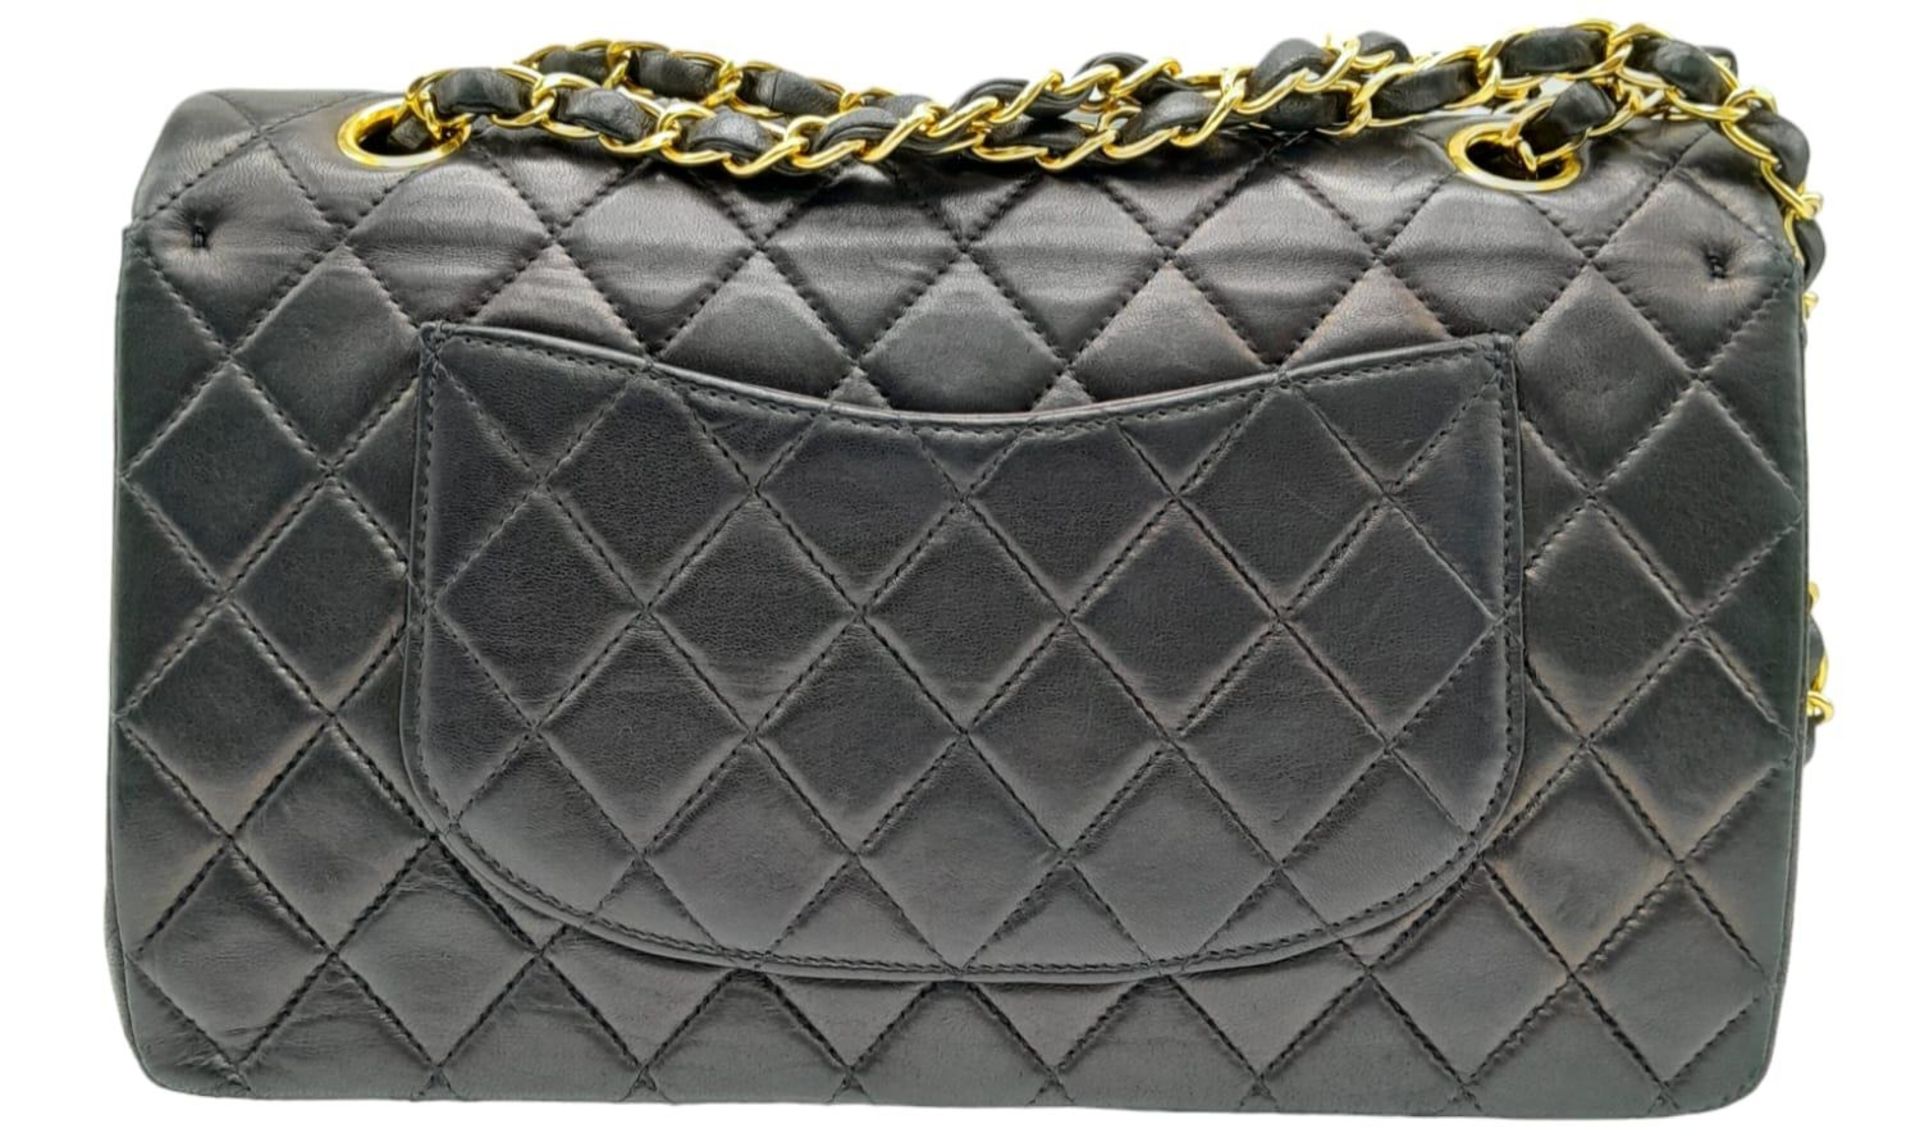 A Chanel Matelasse Chain Shoulder Flap Bag. Black Quilted lamb leather. Gold-tone hardware. CC - Image 4 of 11